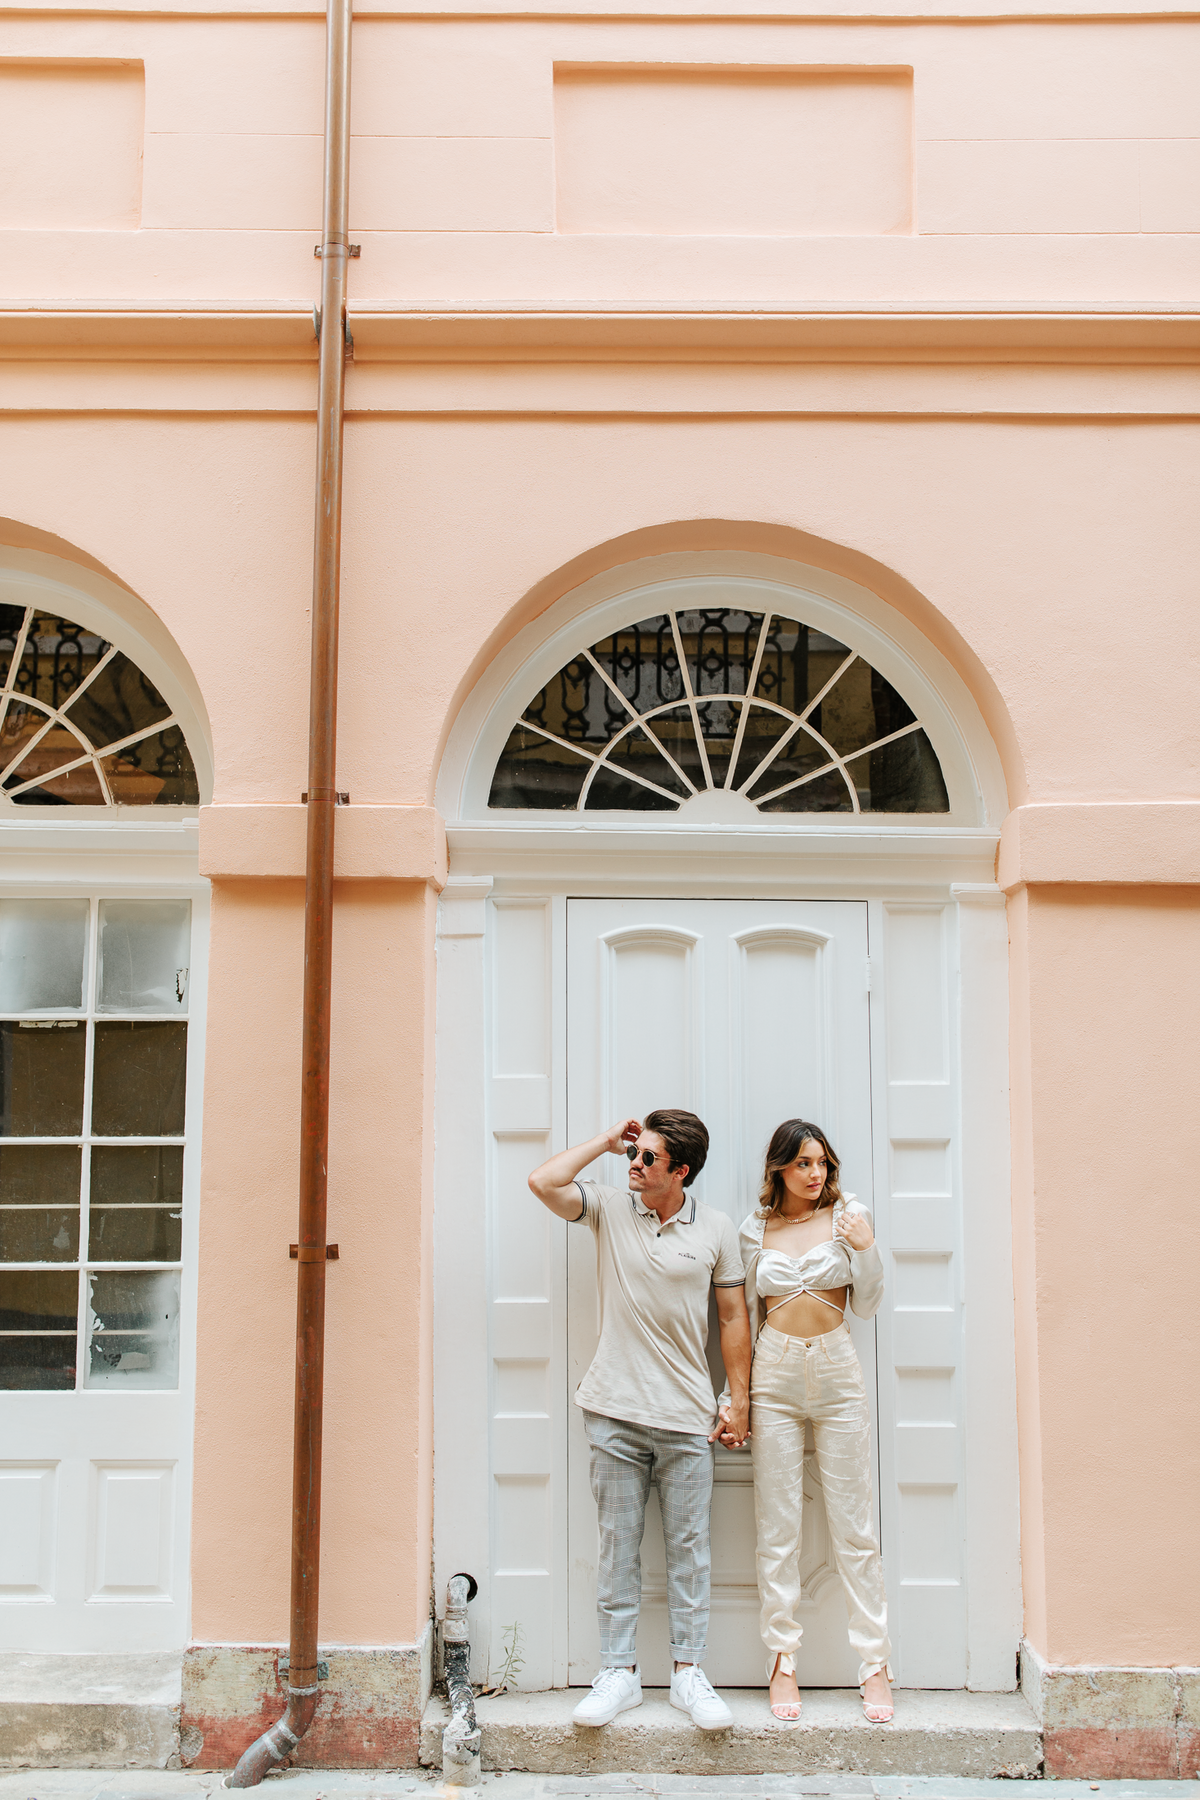 New Orleans French Quarter Vespa Couples Session | Carly Crawford Photography-13